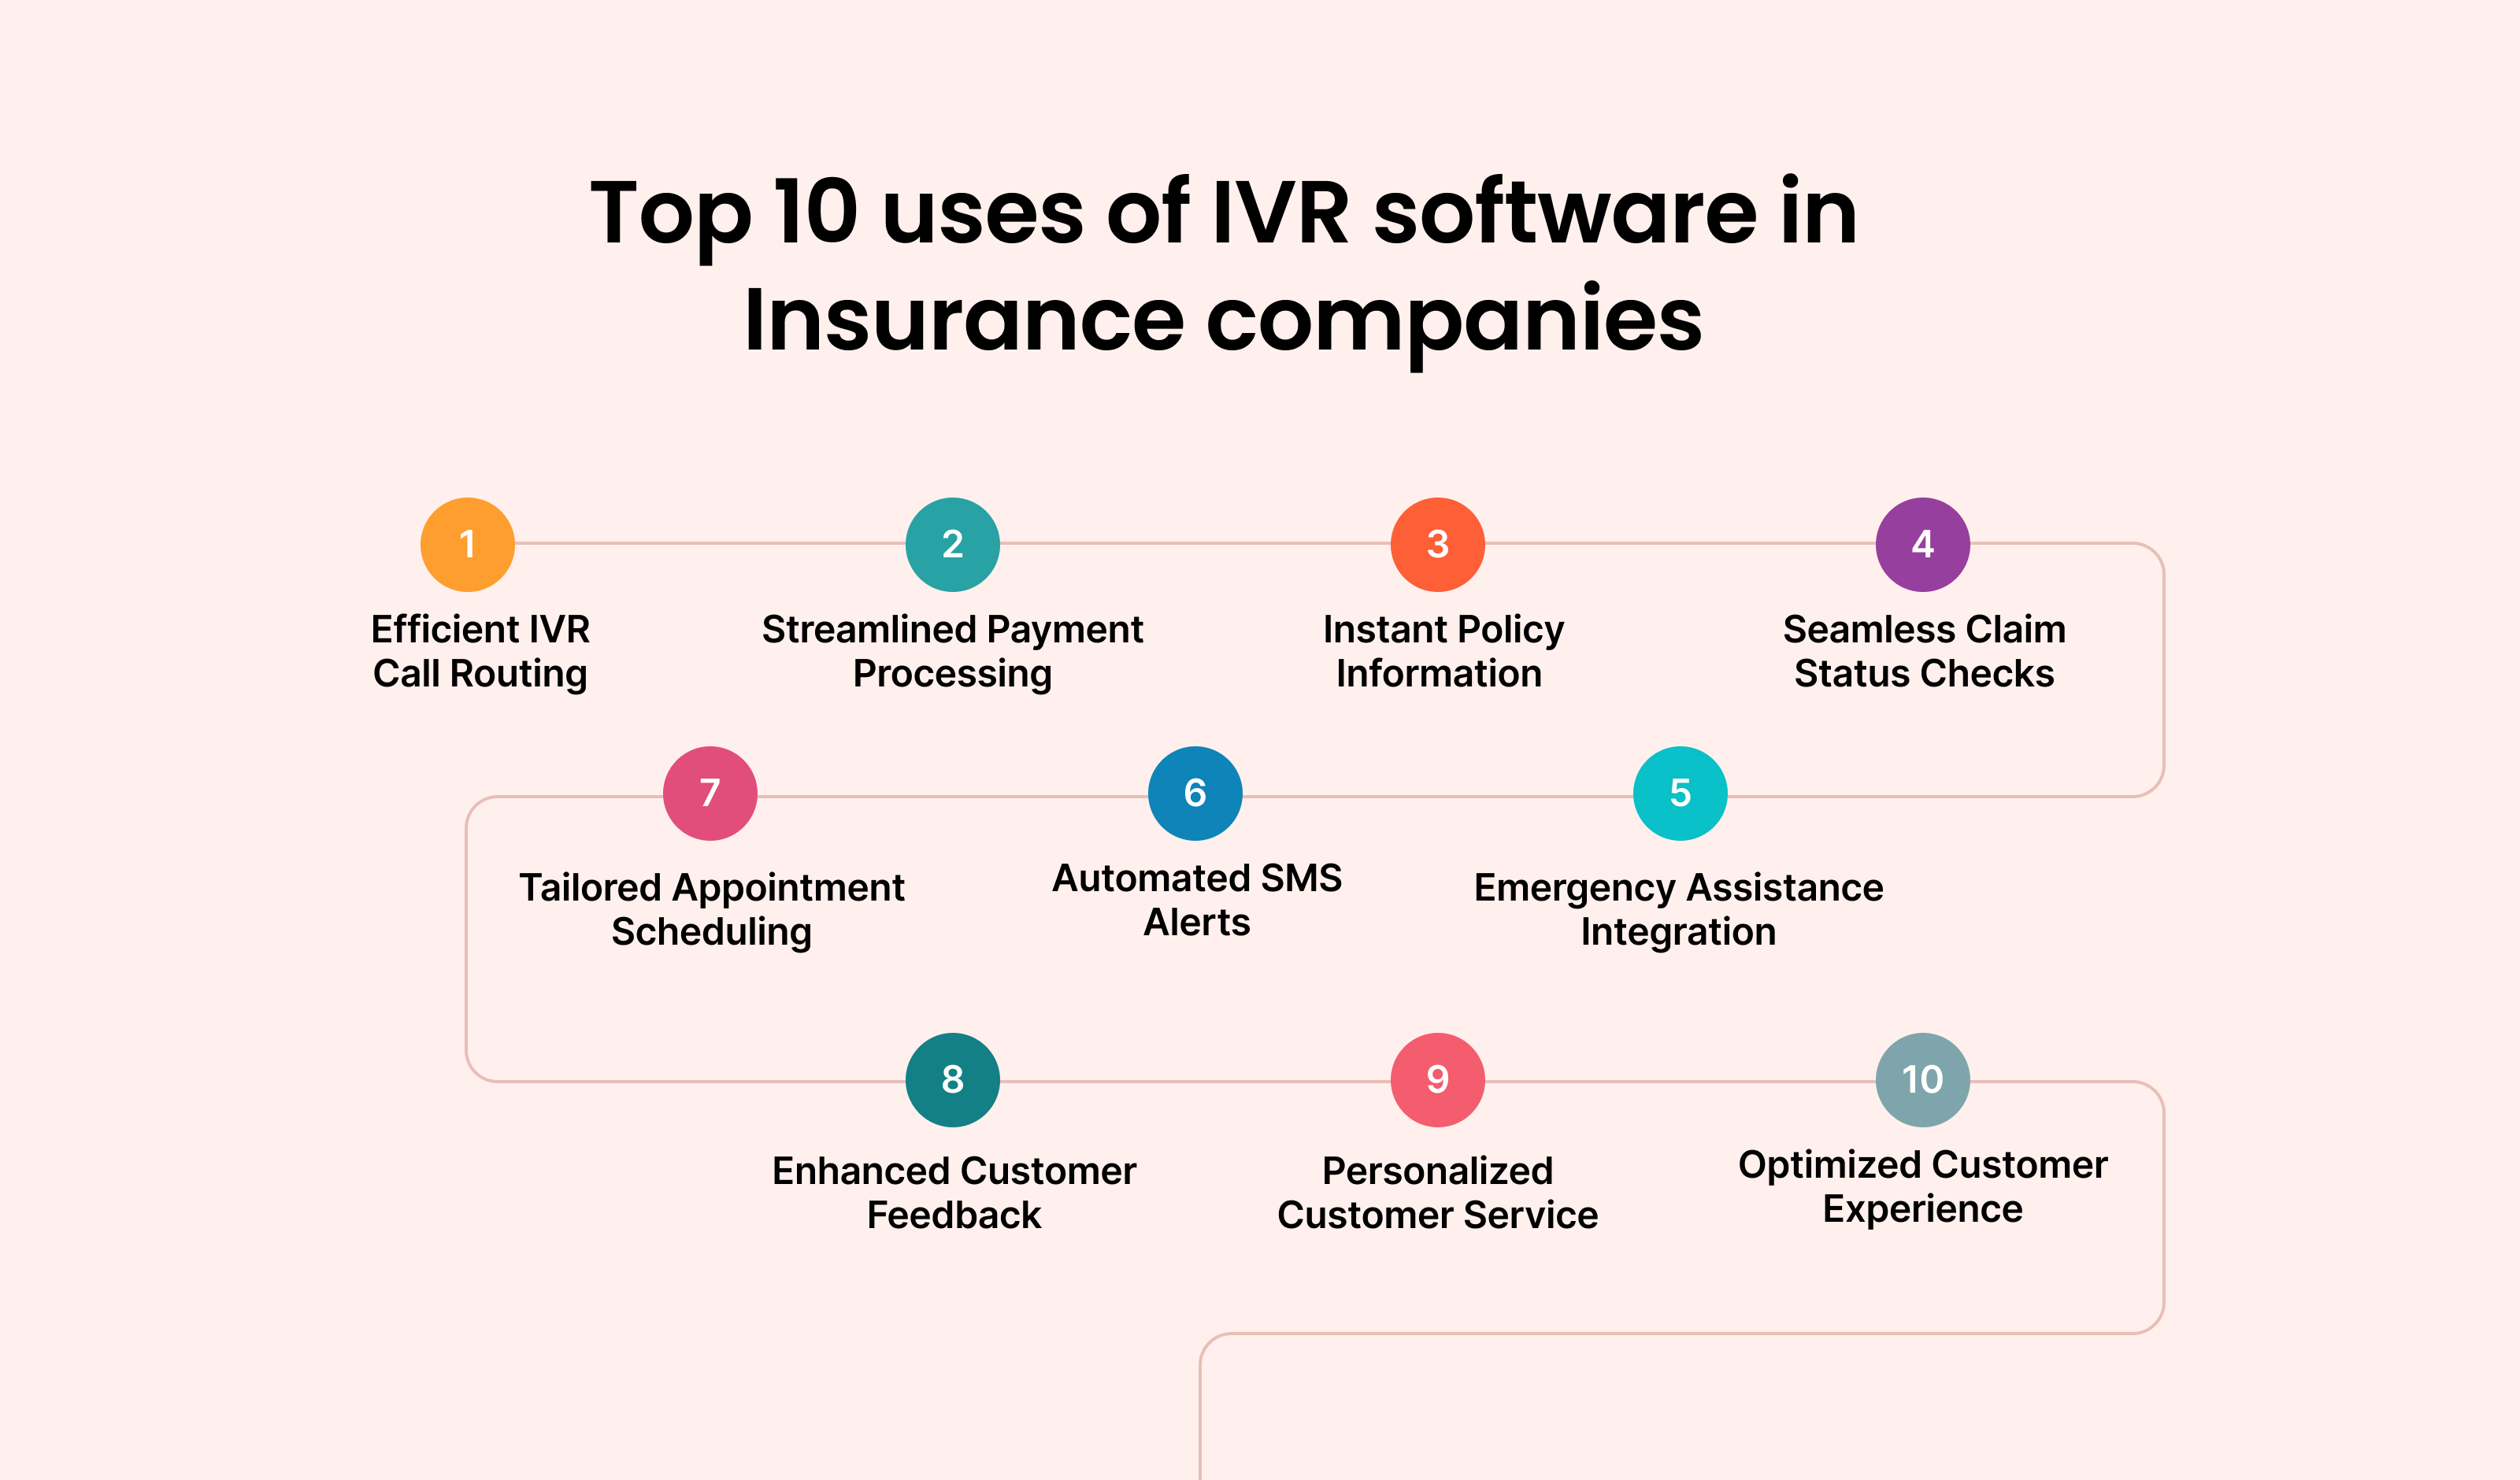 Top 10 Uses of IVR Software in Insurance Companies: